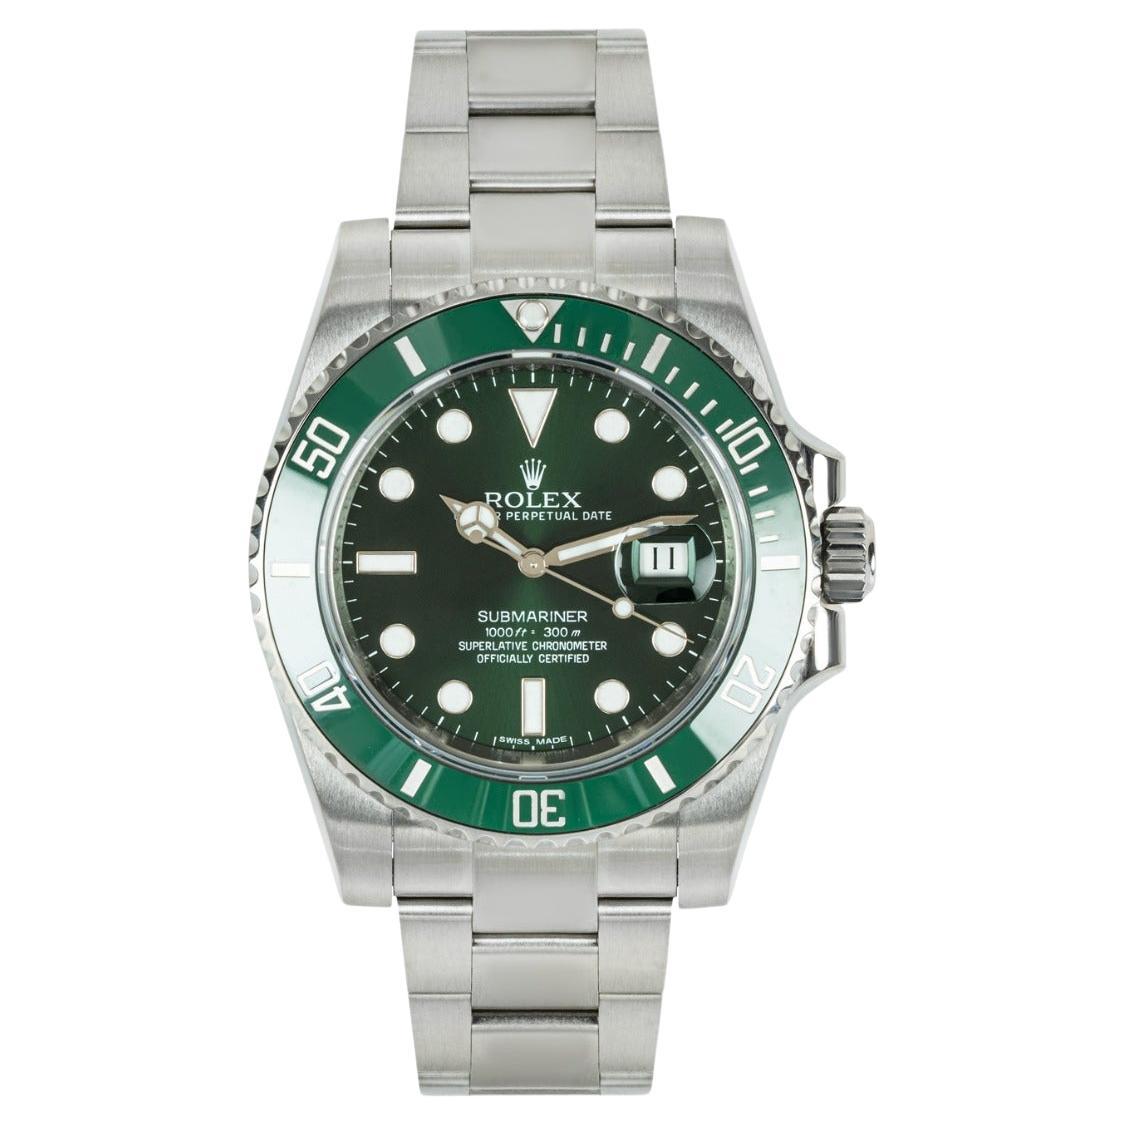 What is the speciality of a Rolex watch?